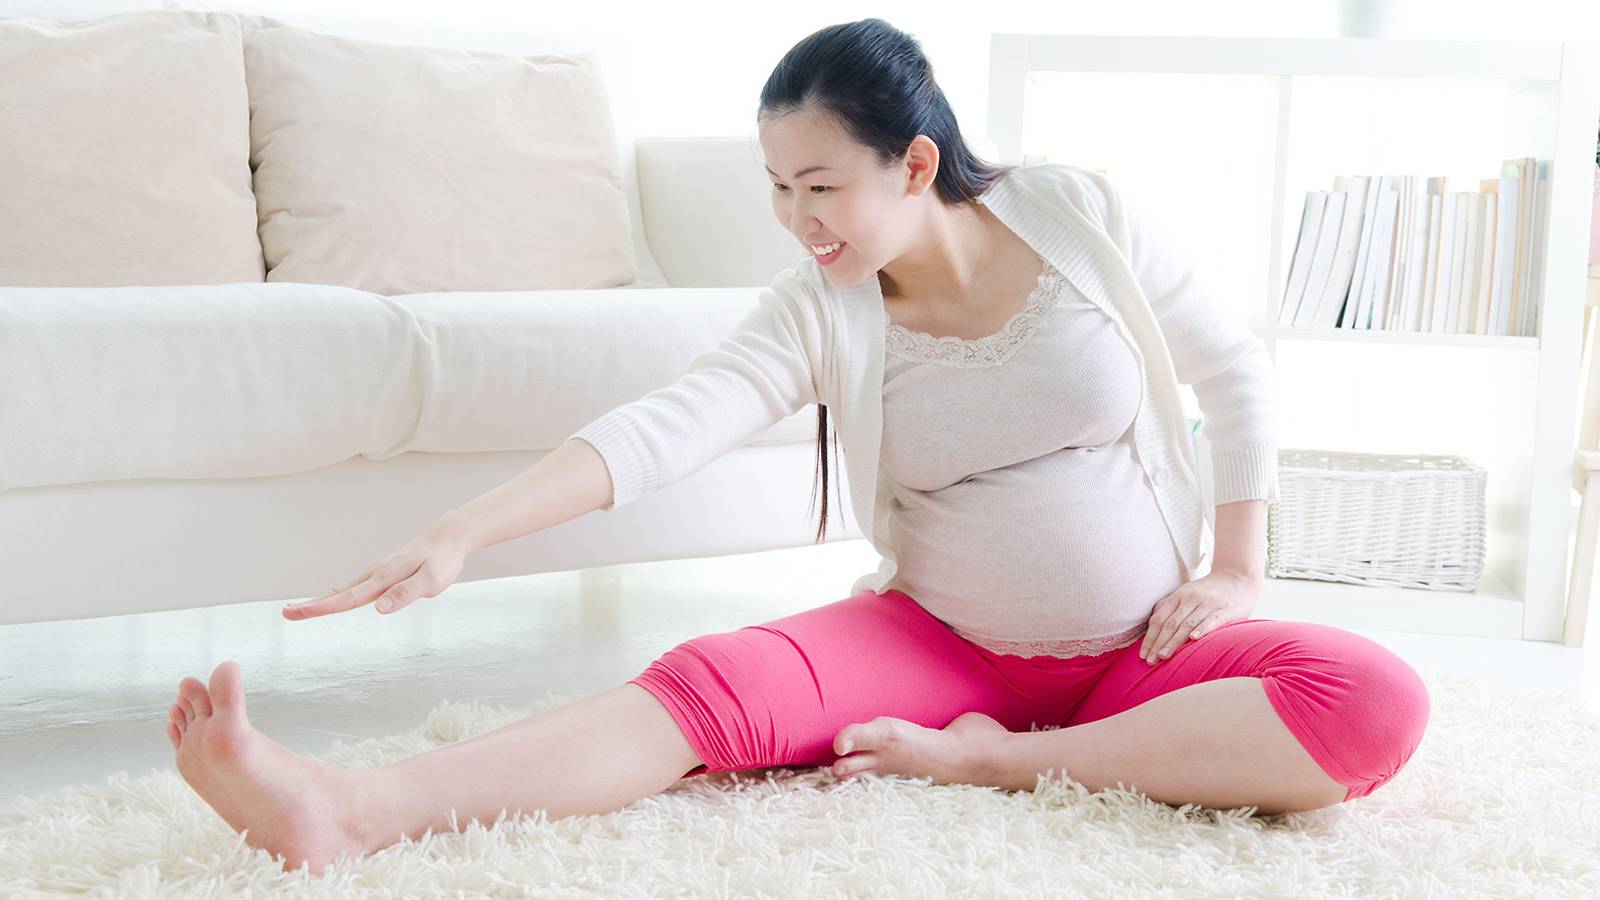 Pregnancy-Top-exercises-to-benefit-baby-bump-and-you